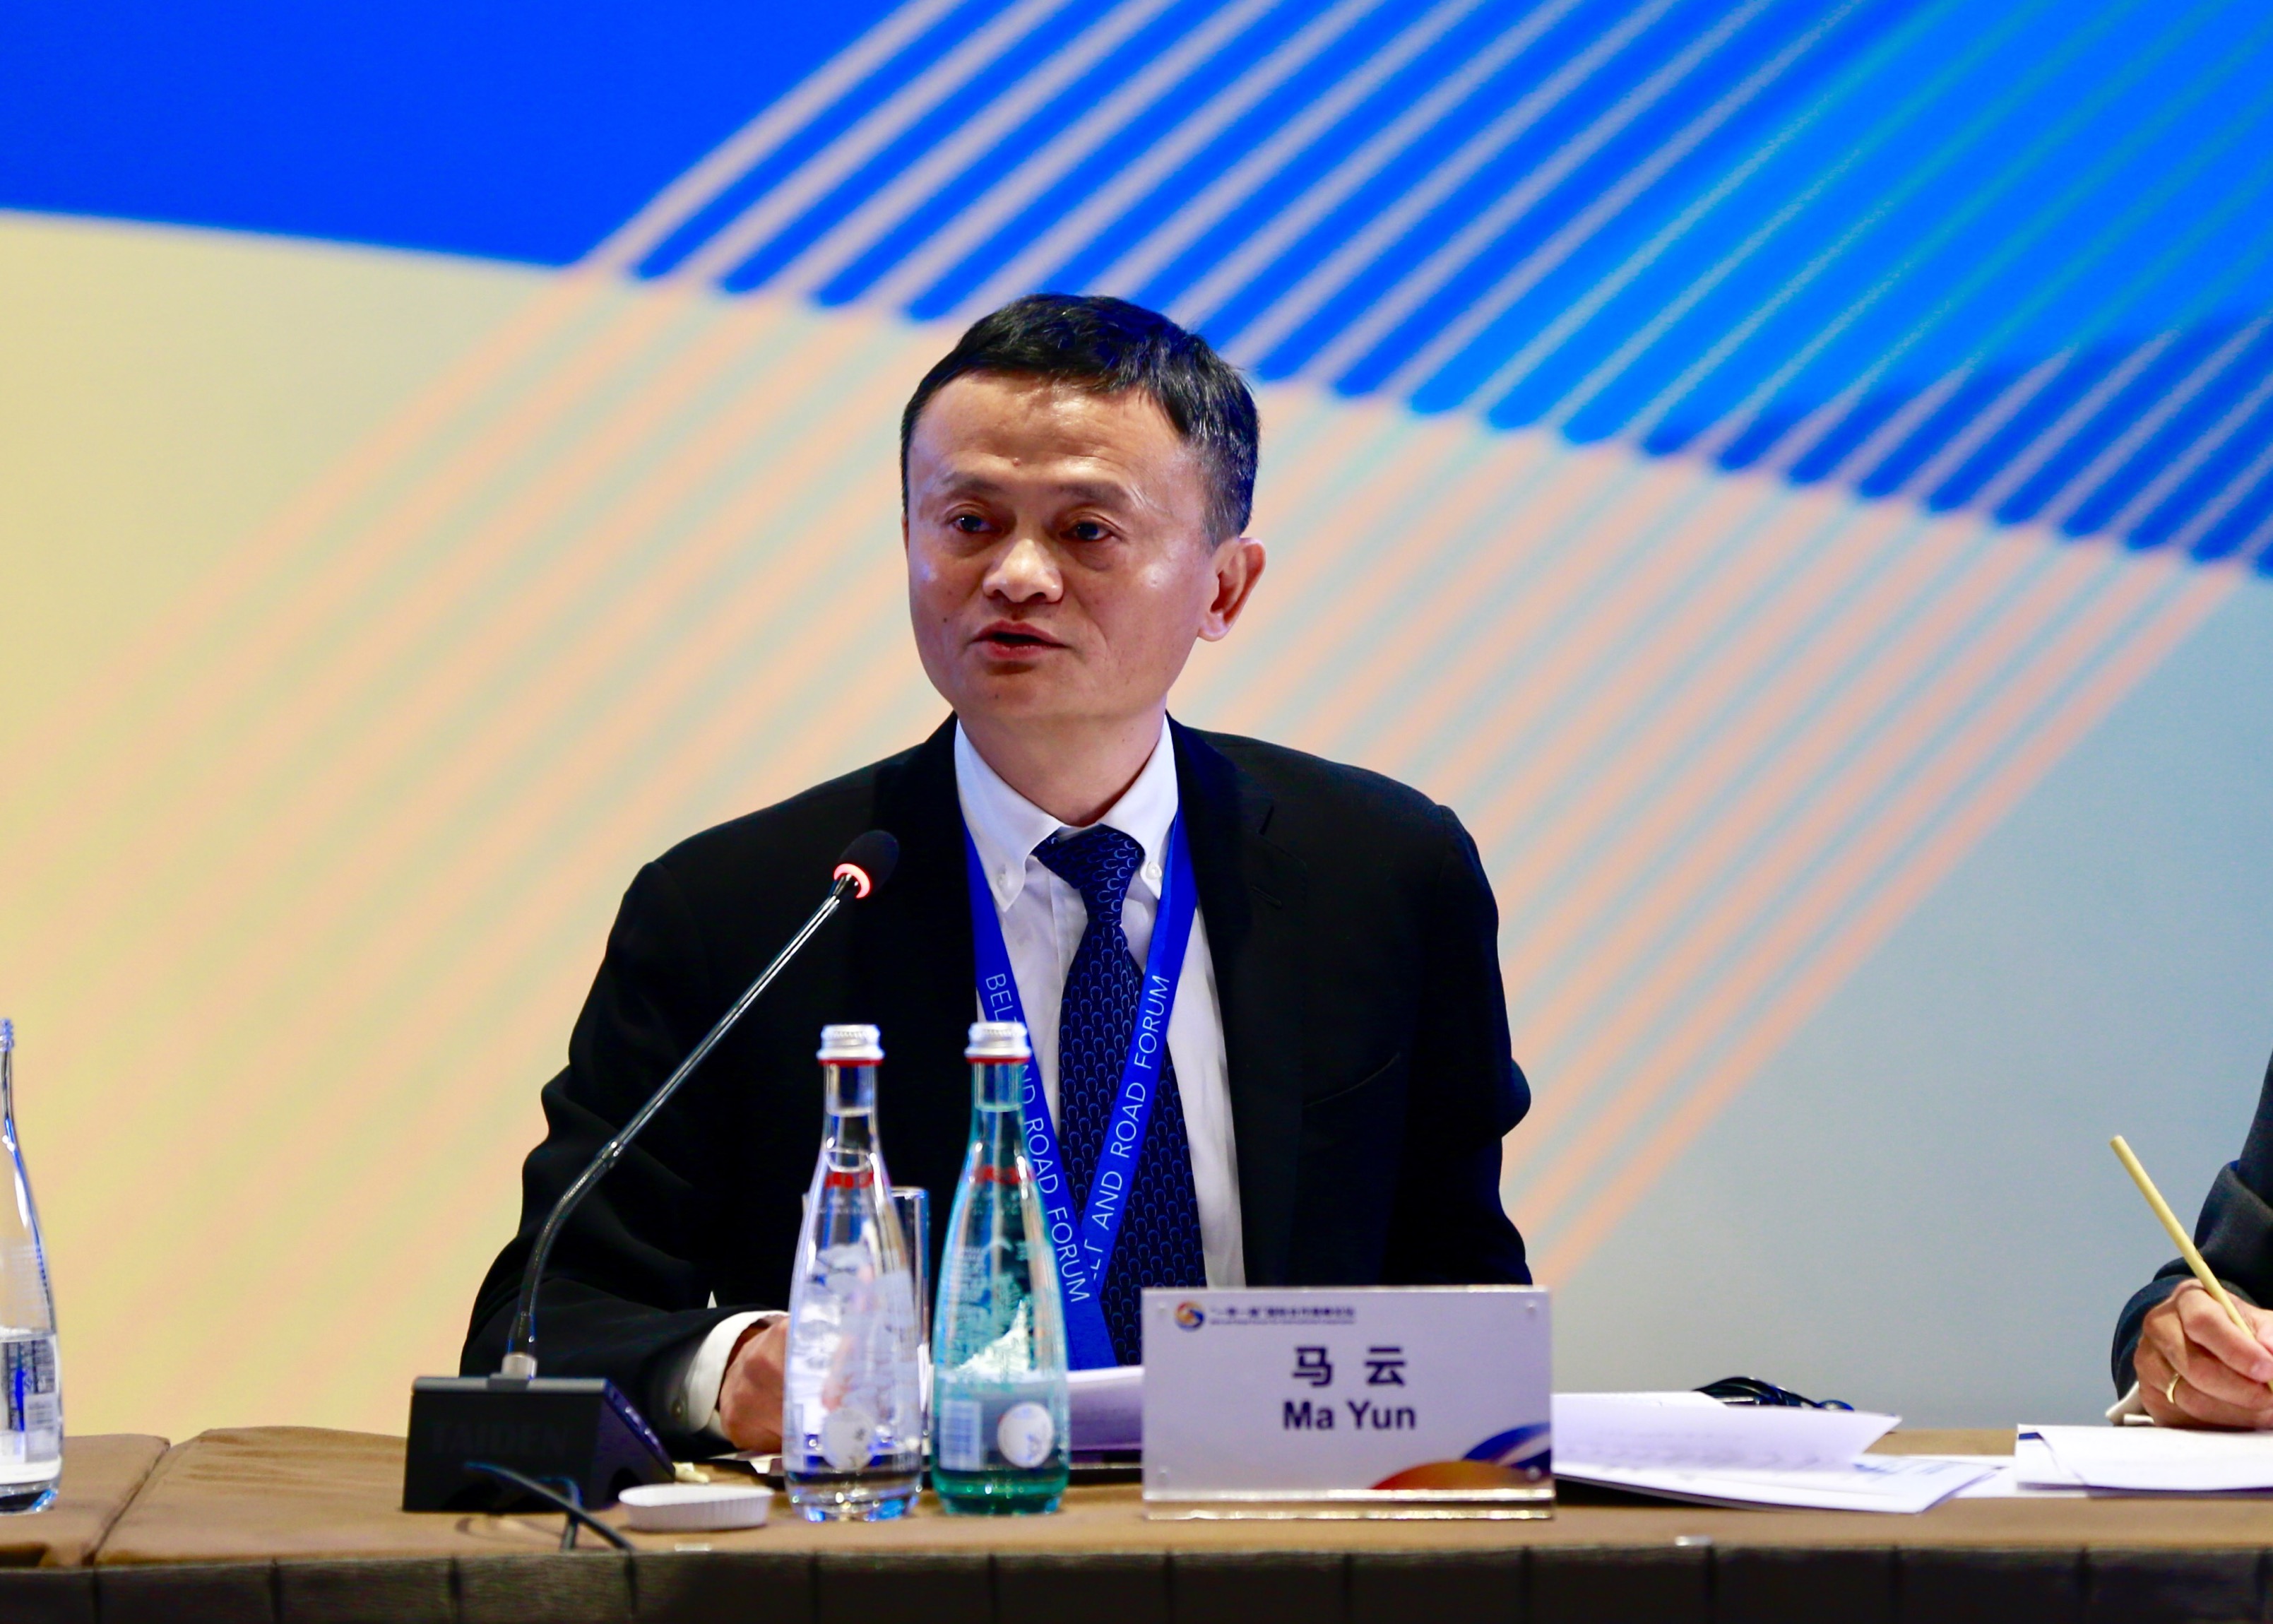 Jack Ma, executive chair of Chinese e-commerce giant Alibaba, speaks at a parallel session of the Belt and Road Forum for International Cooperation held in Beijing on Sunday, May 14, 2017. [Photo provided by Alibaba Group]